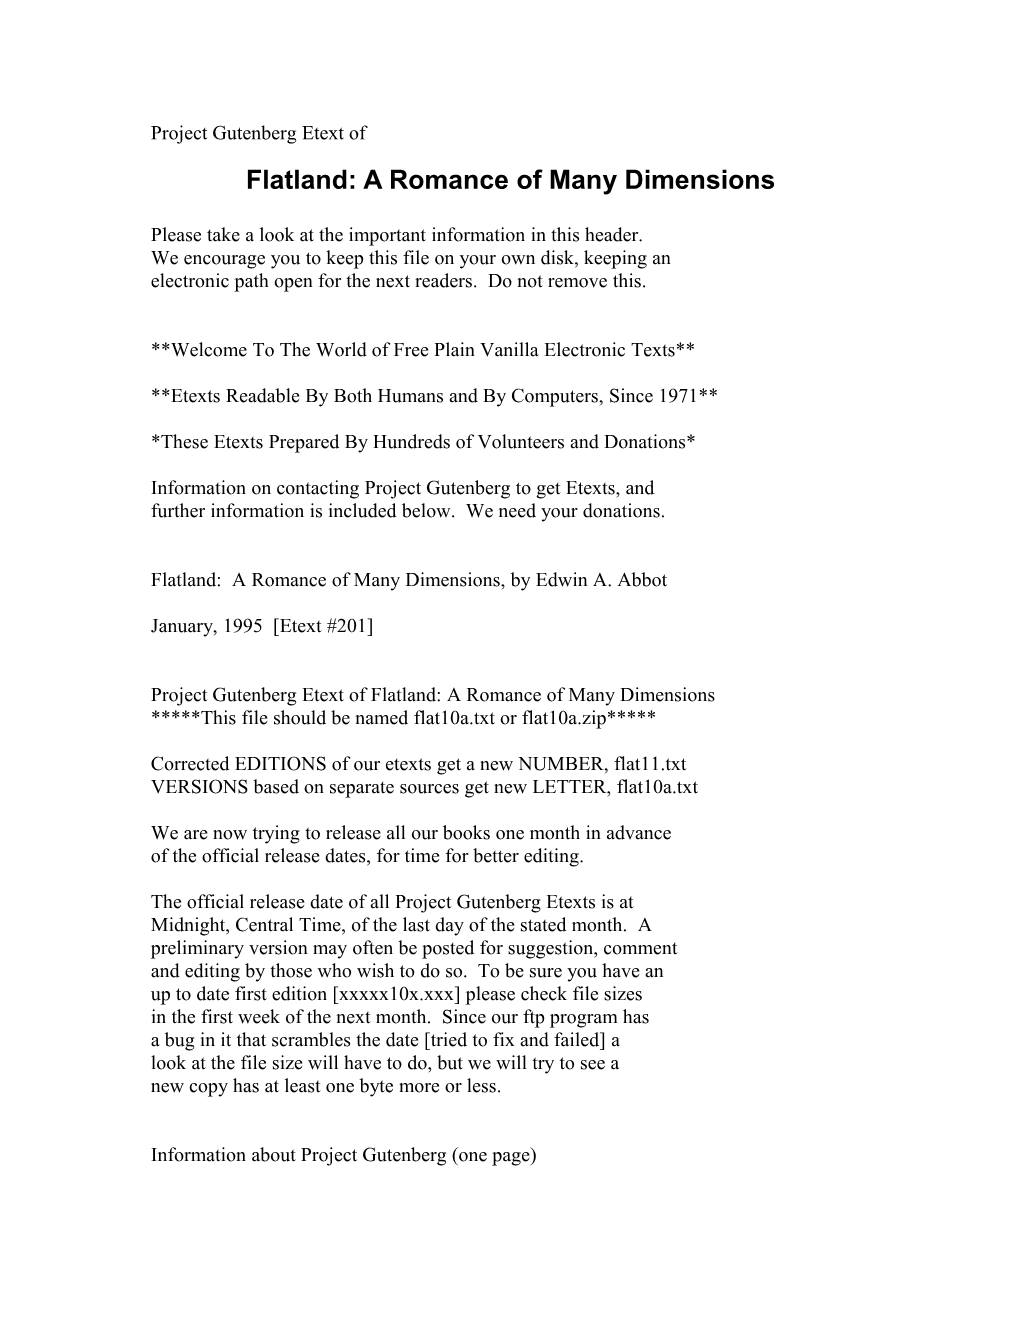 Project Gutenberg Etext of Flatland: a Romance of Many Dimensions